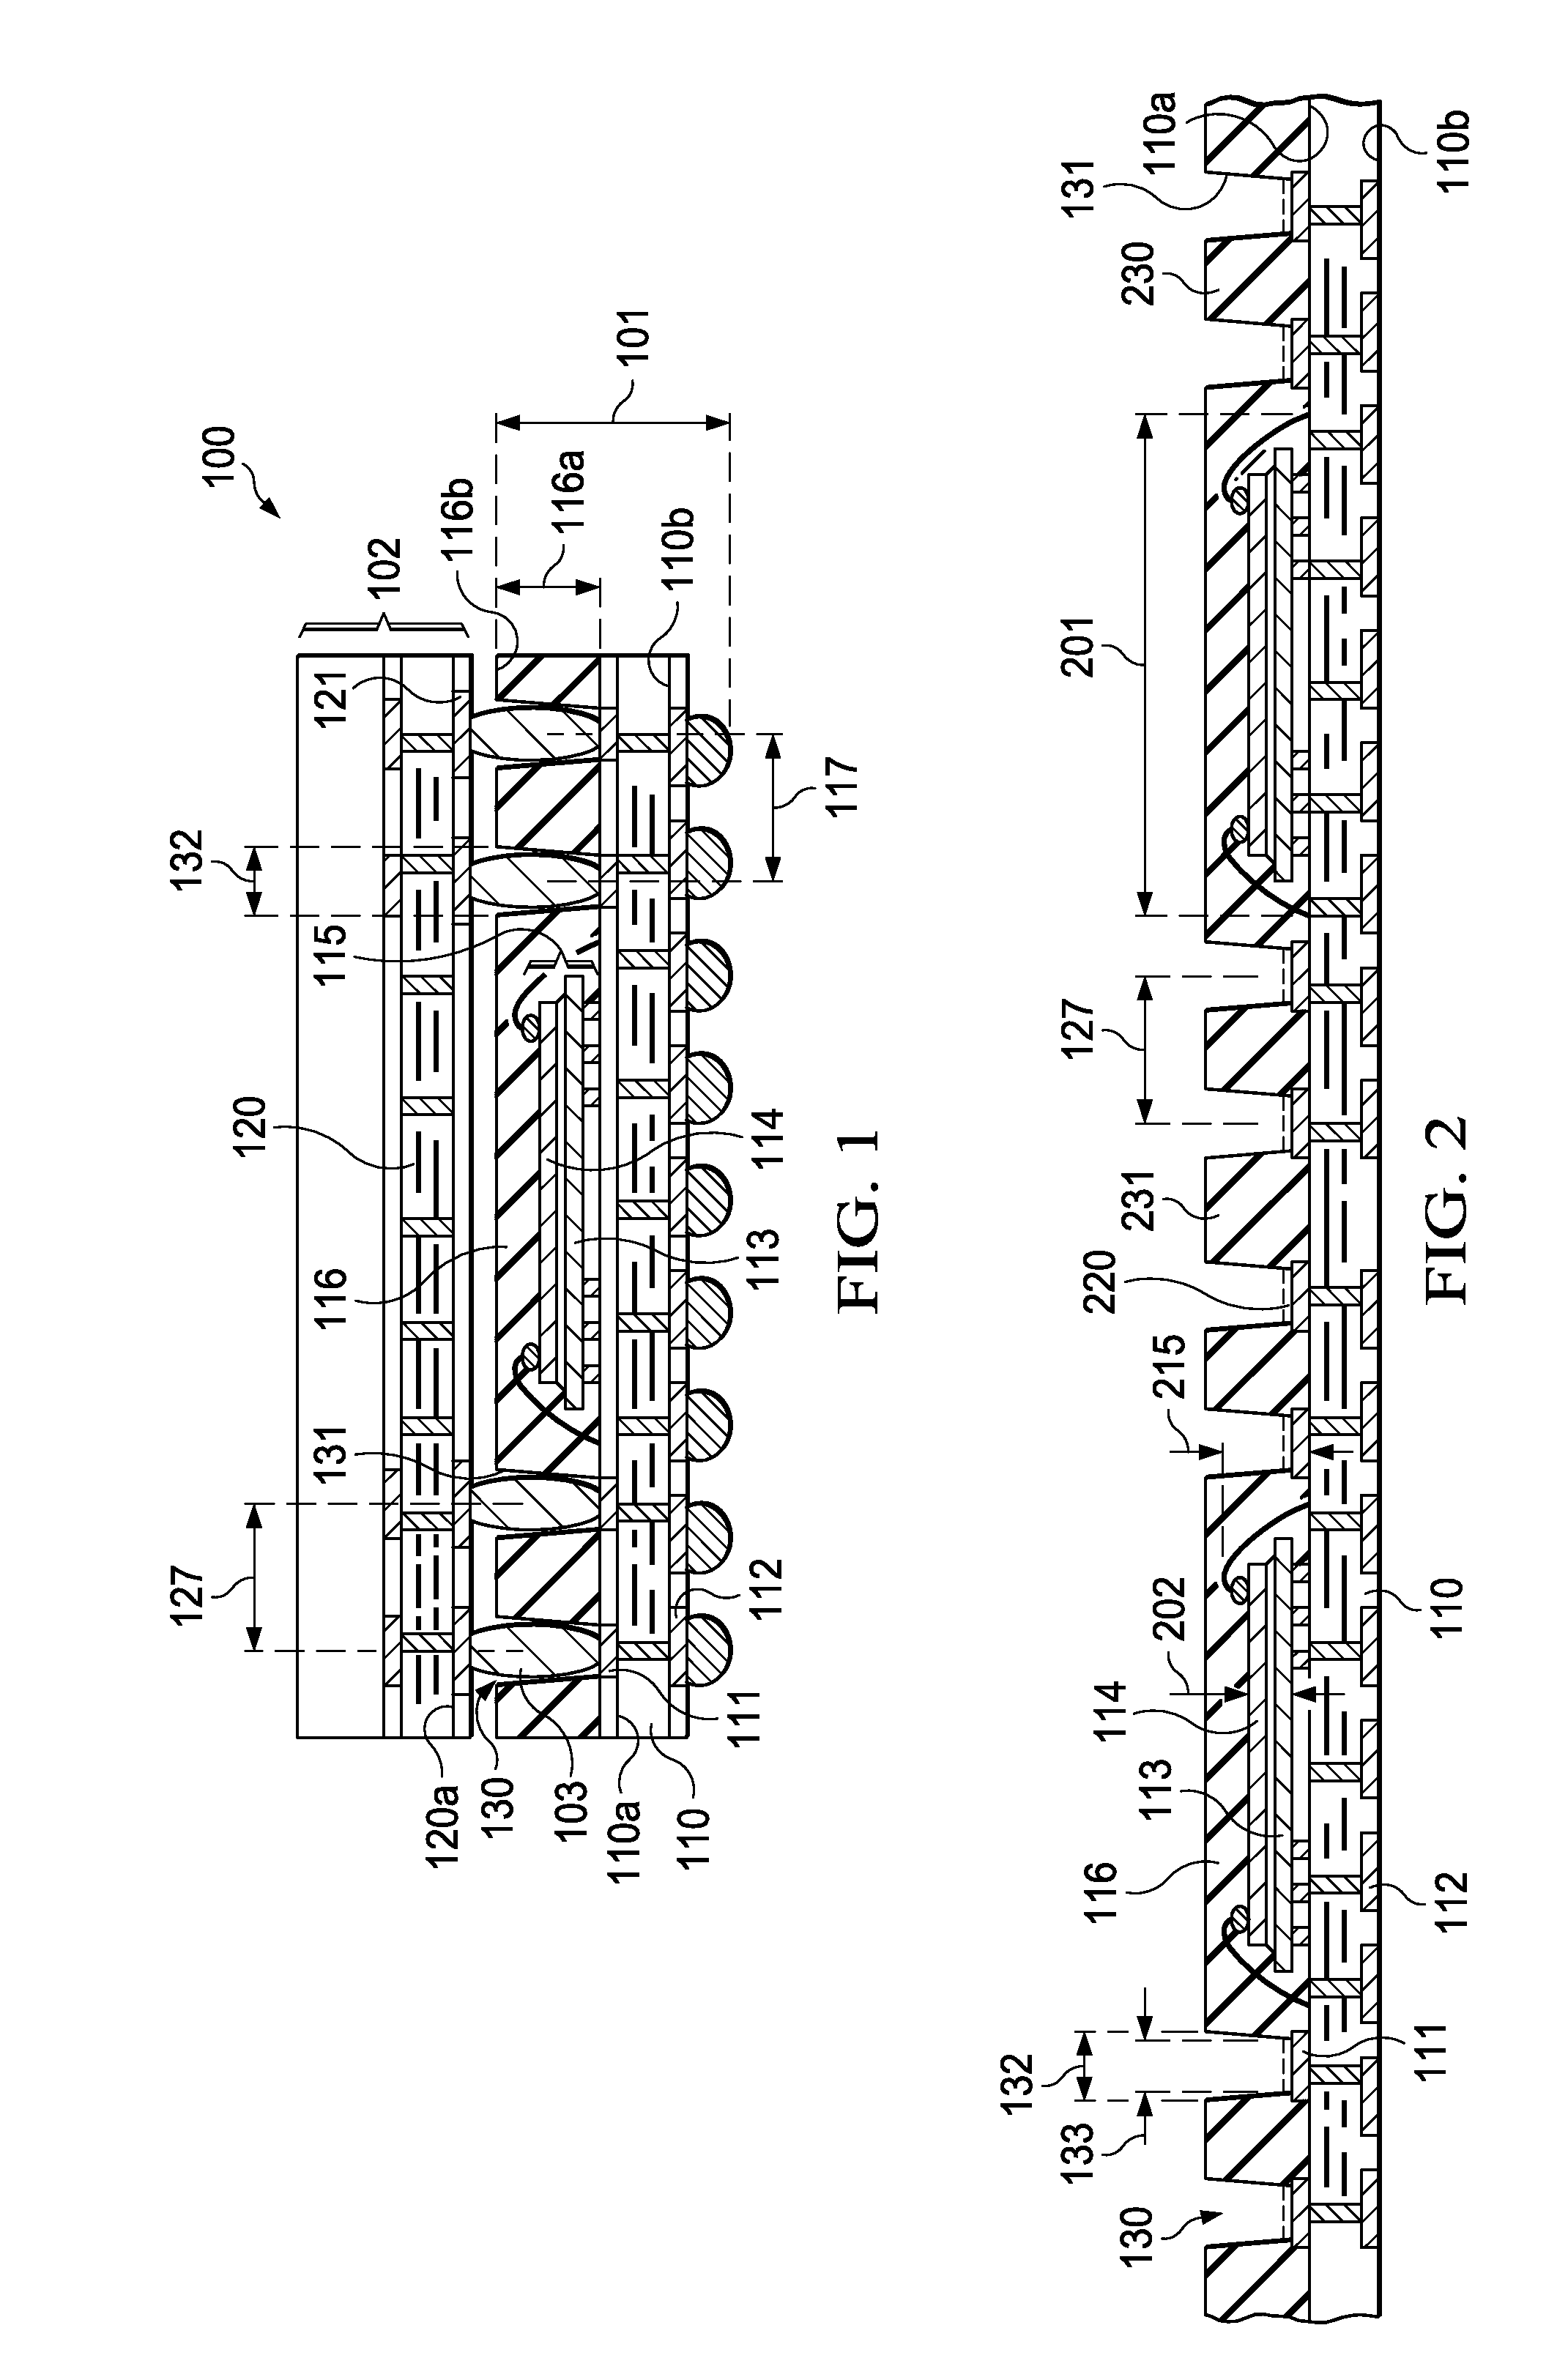 Fine-pitch oblong solder connections for stacking multi-chip packages